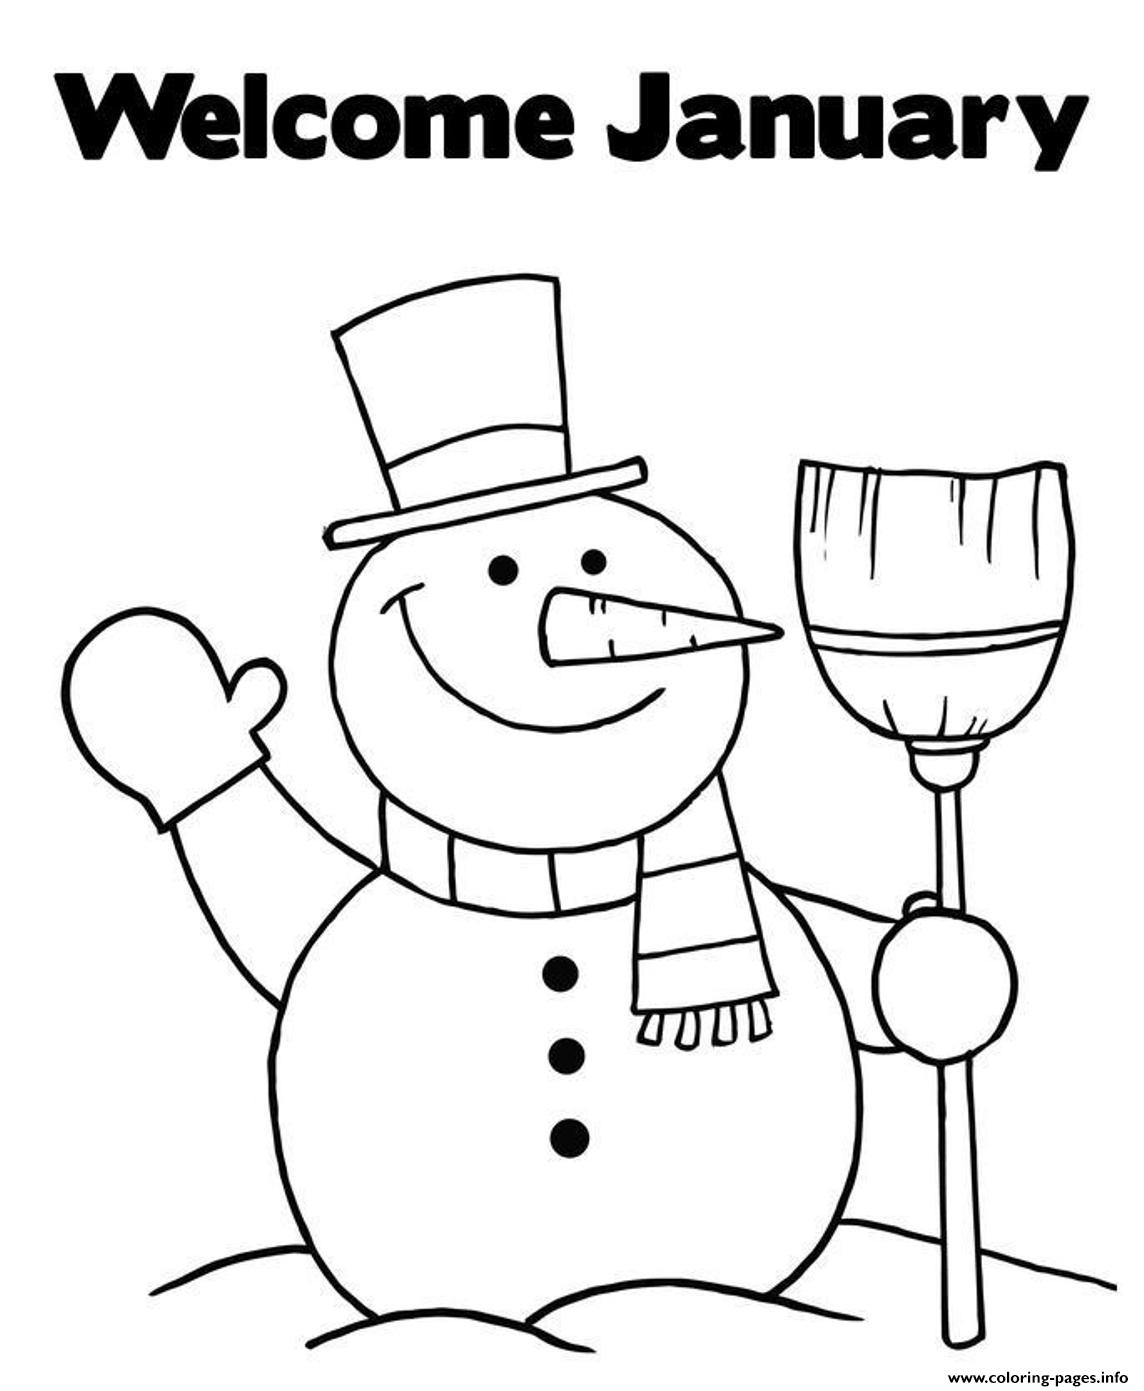 welcome-january-snowman-s5f24-coloring-pages-printable